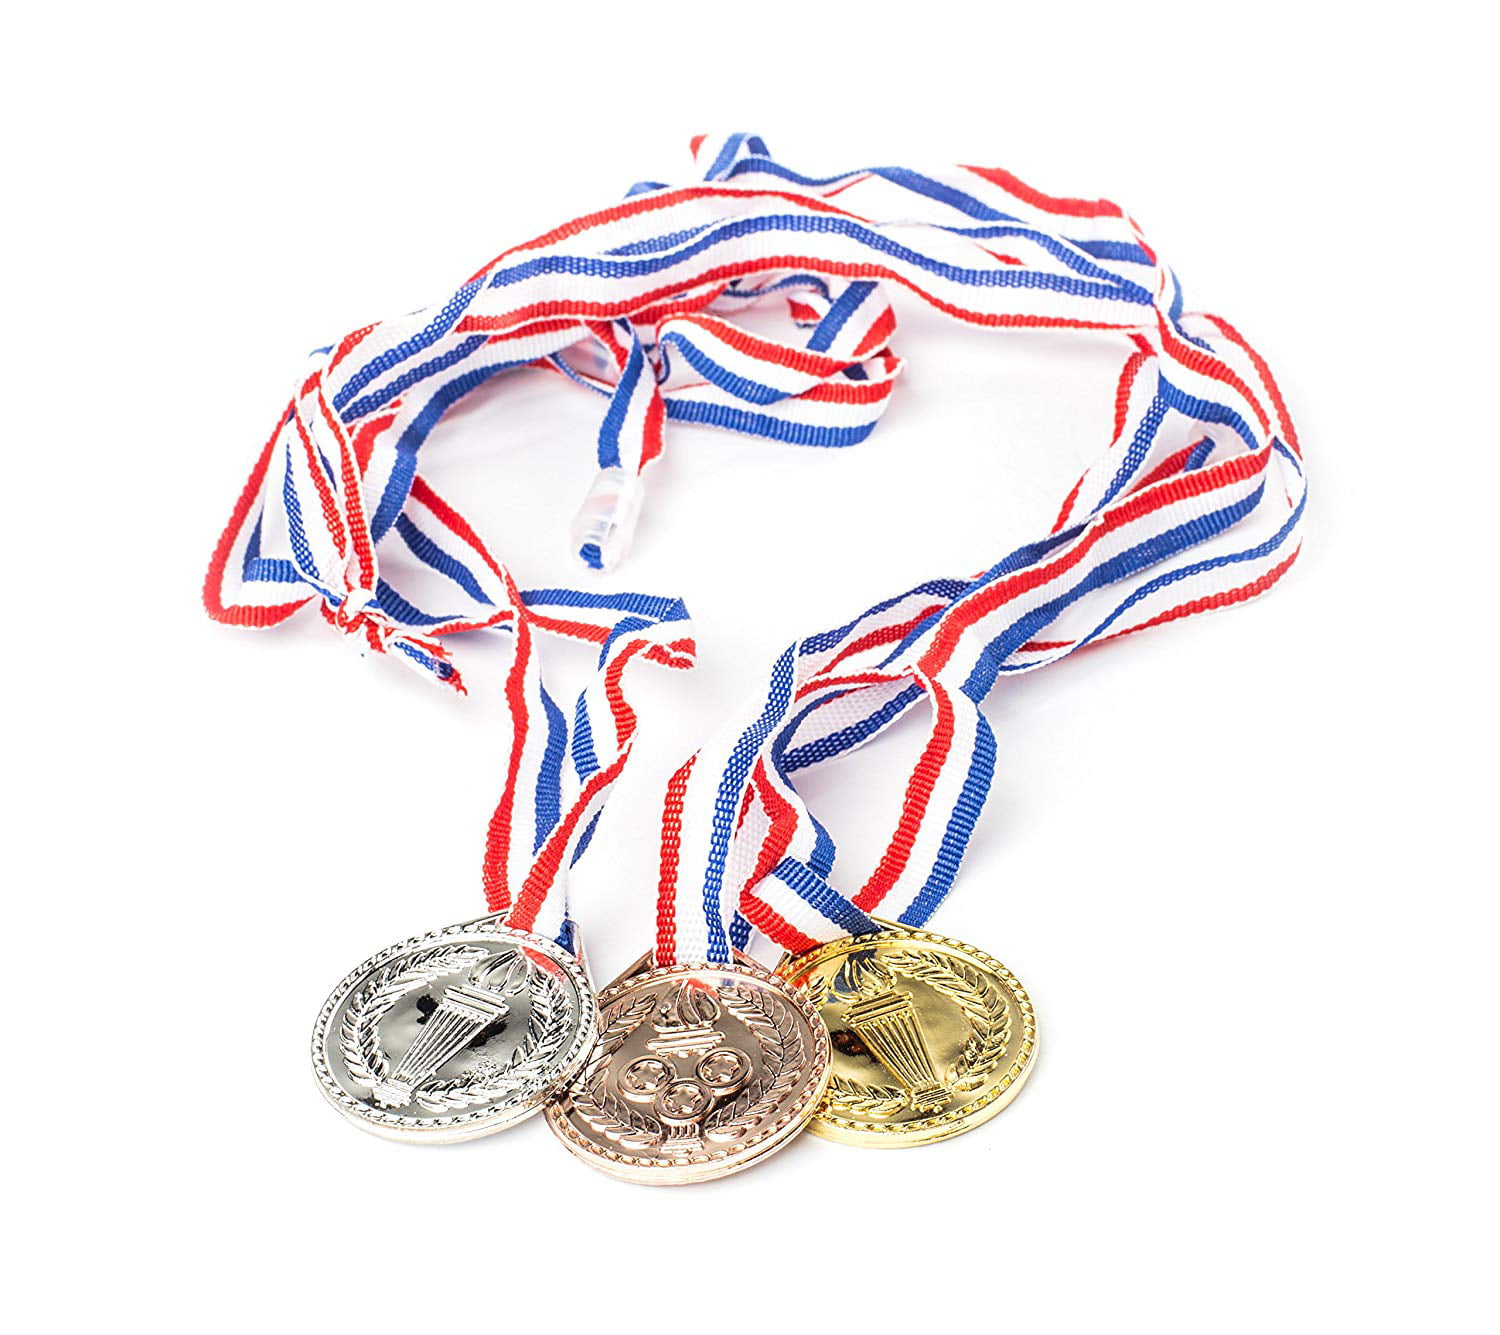 63 Pcs 2 Inches Adults 63 Pieces Gold Silver Bronze Award Medals Sports 1st 2nd 3rd Prize Medals for Kids Metal Winner Award Medals with Neck Ribbon Spelling Bees Olympic Style Competitions 